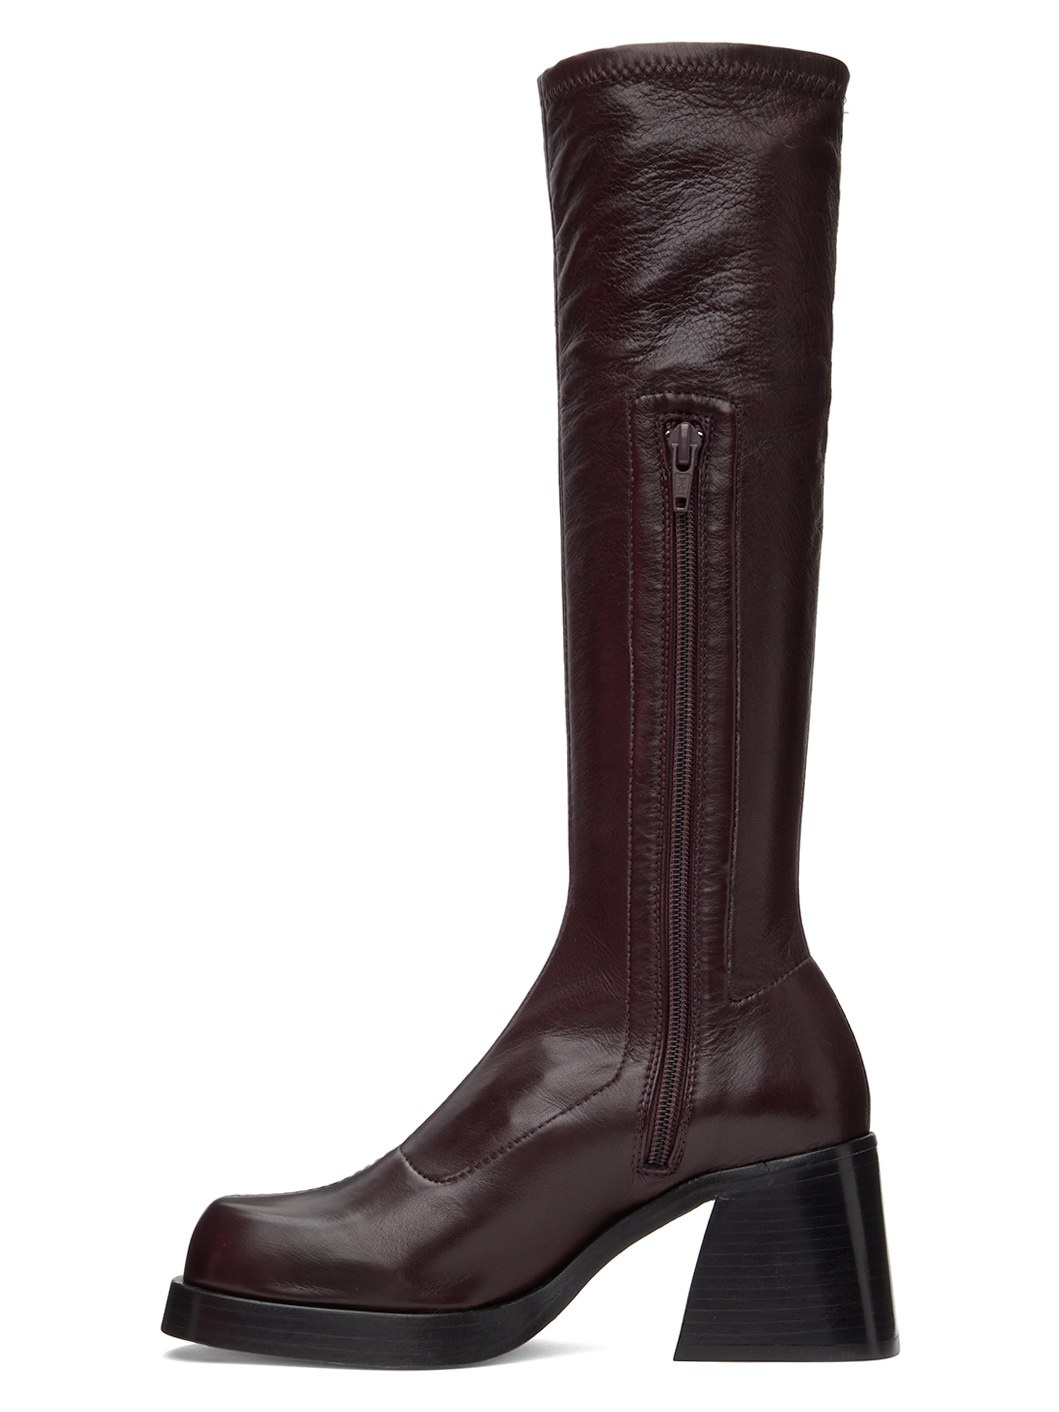 Burgundy Hedy Boots - 3